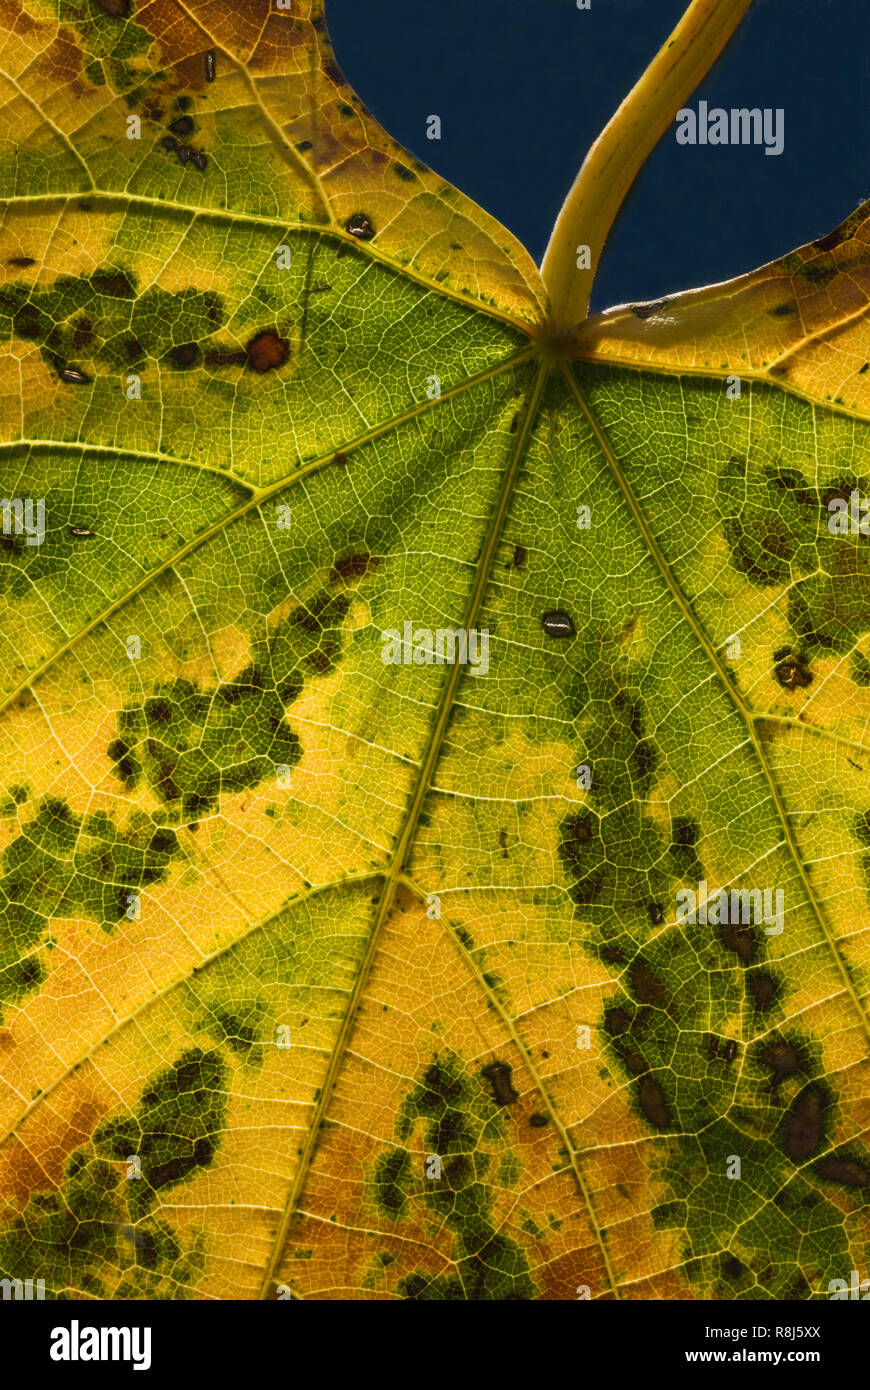 Backlit leaf showing primary veins radiating from petiole and secondary and teriary veins extending from those. Xylem in veins carries water and miner Stock Photo